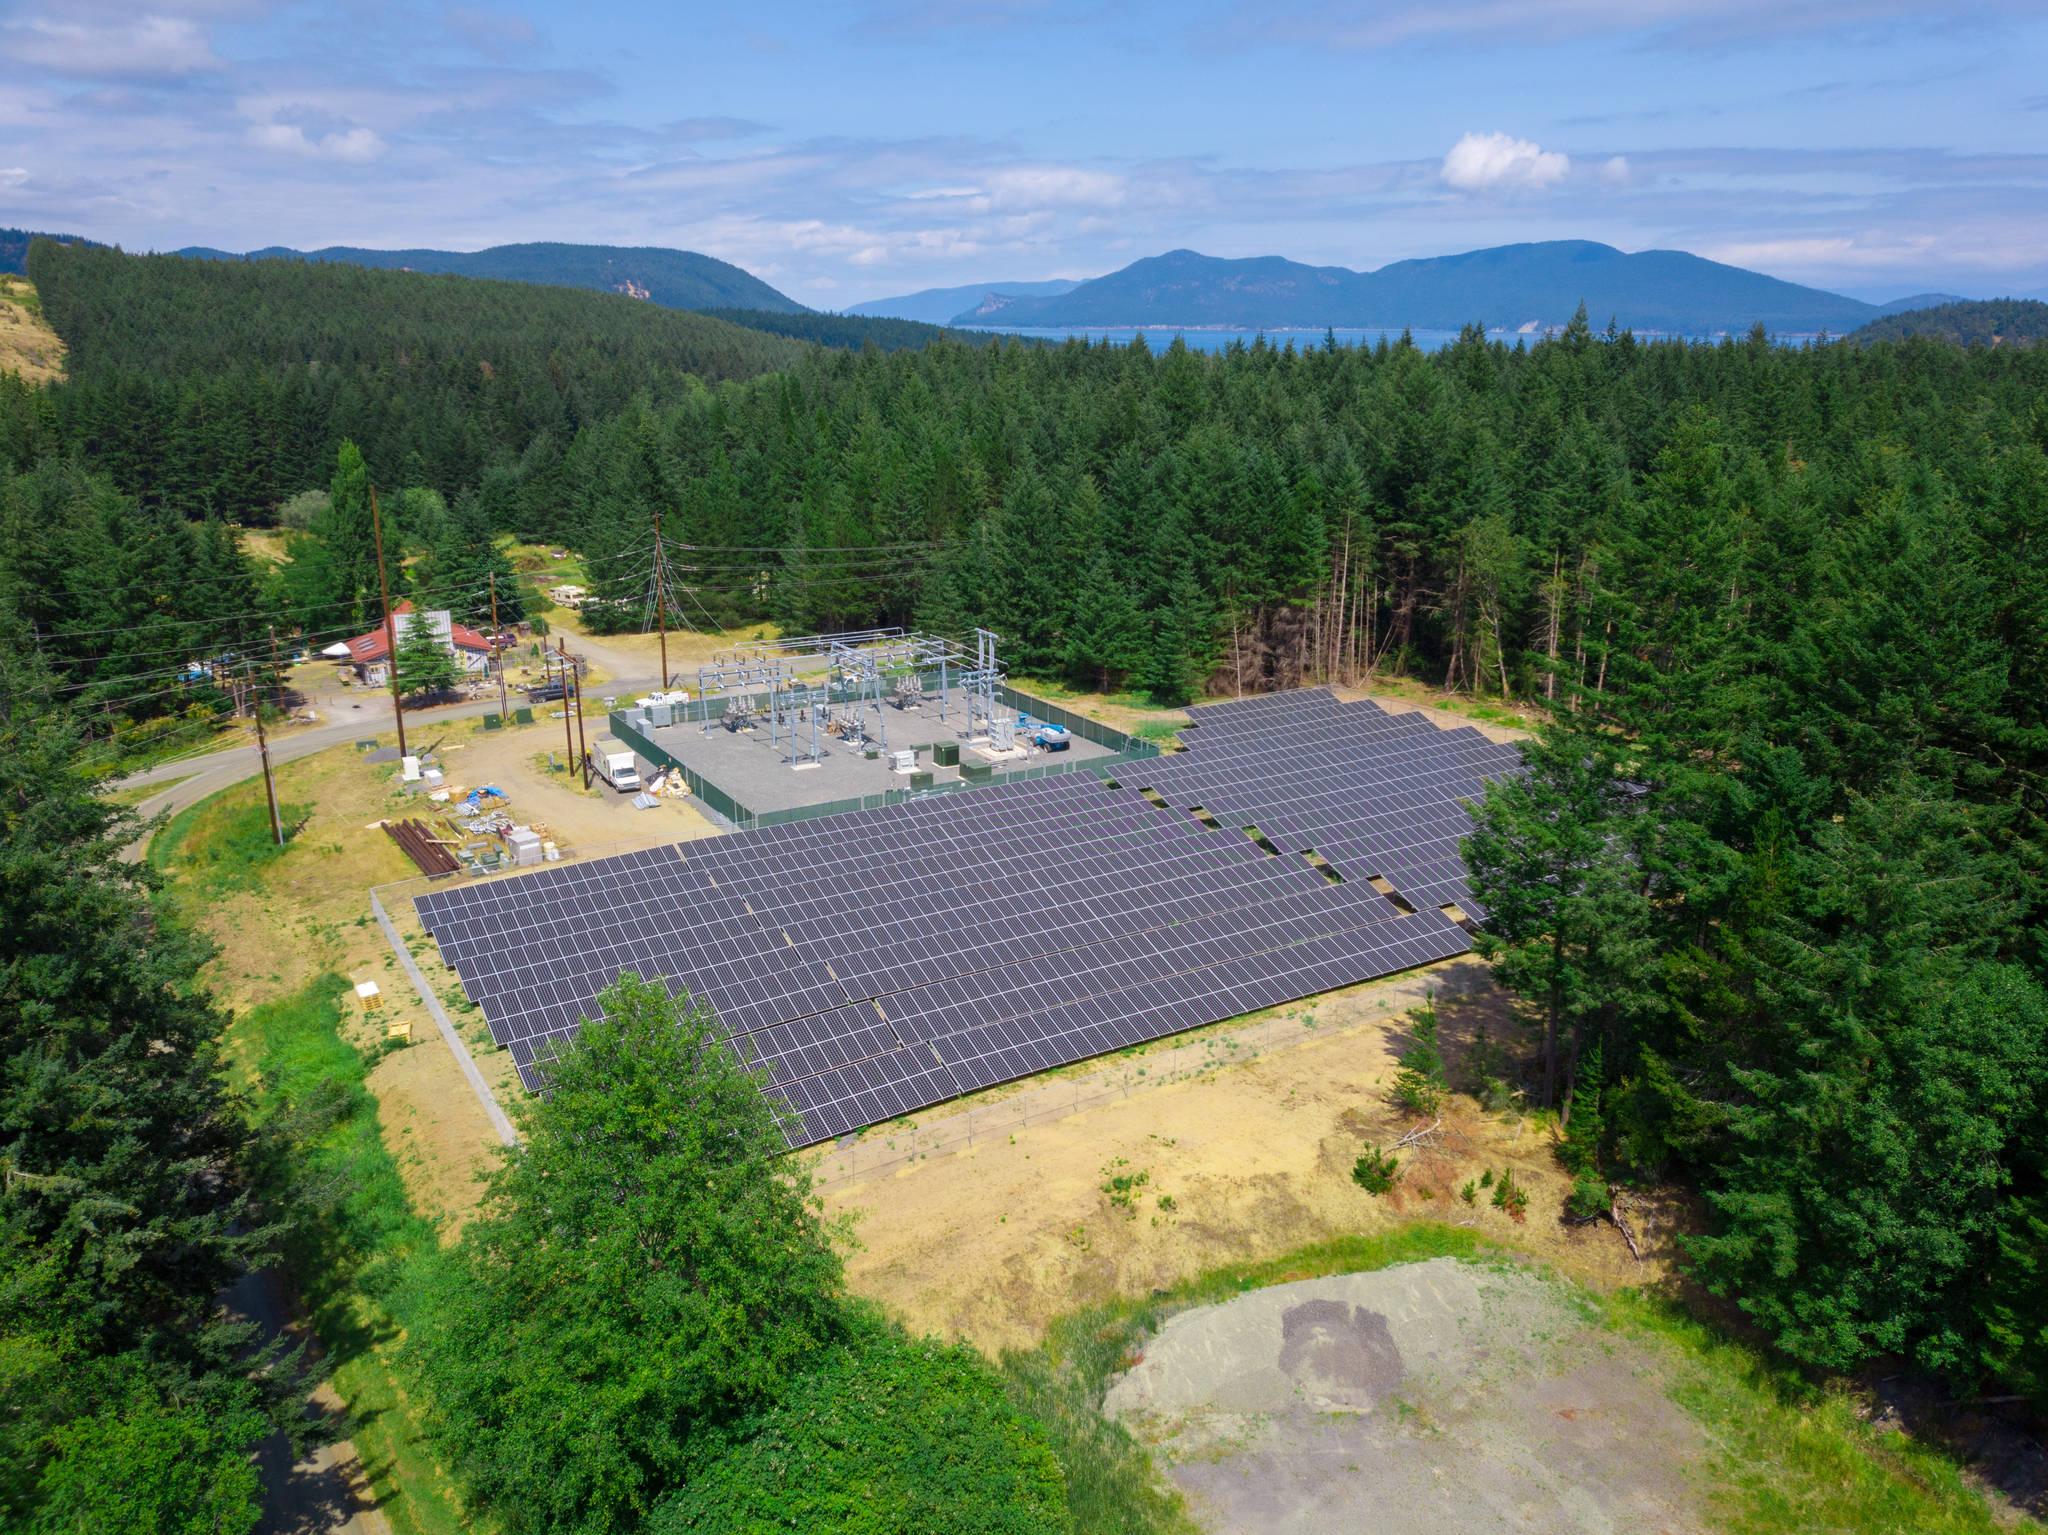 The solar project on Decatur Island.